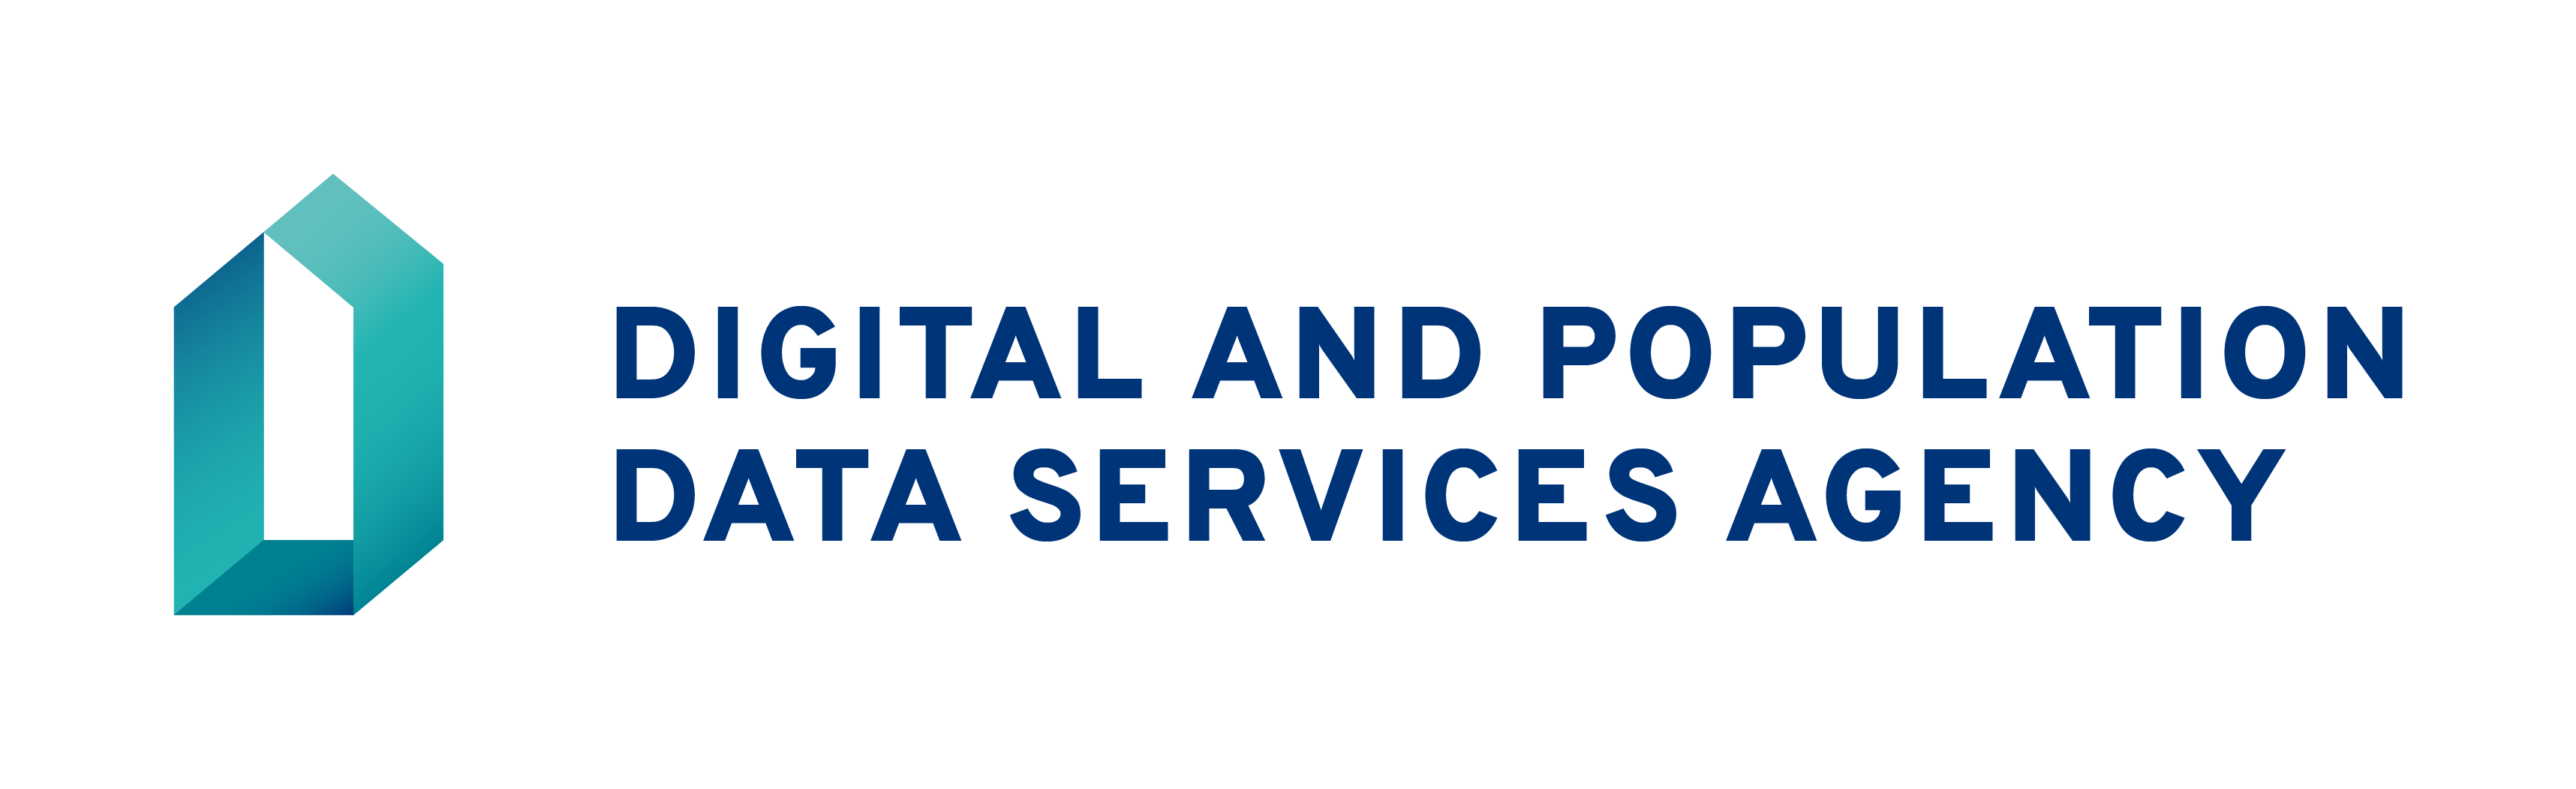 Digital and Population Data Services Agency’s logo in English, horizontal format